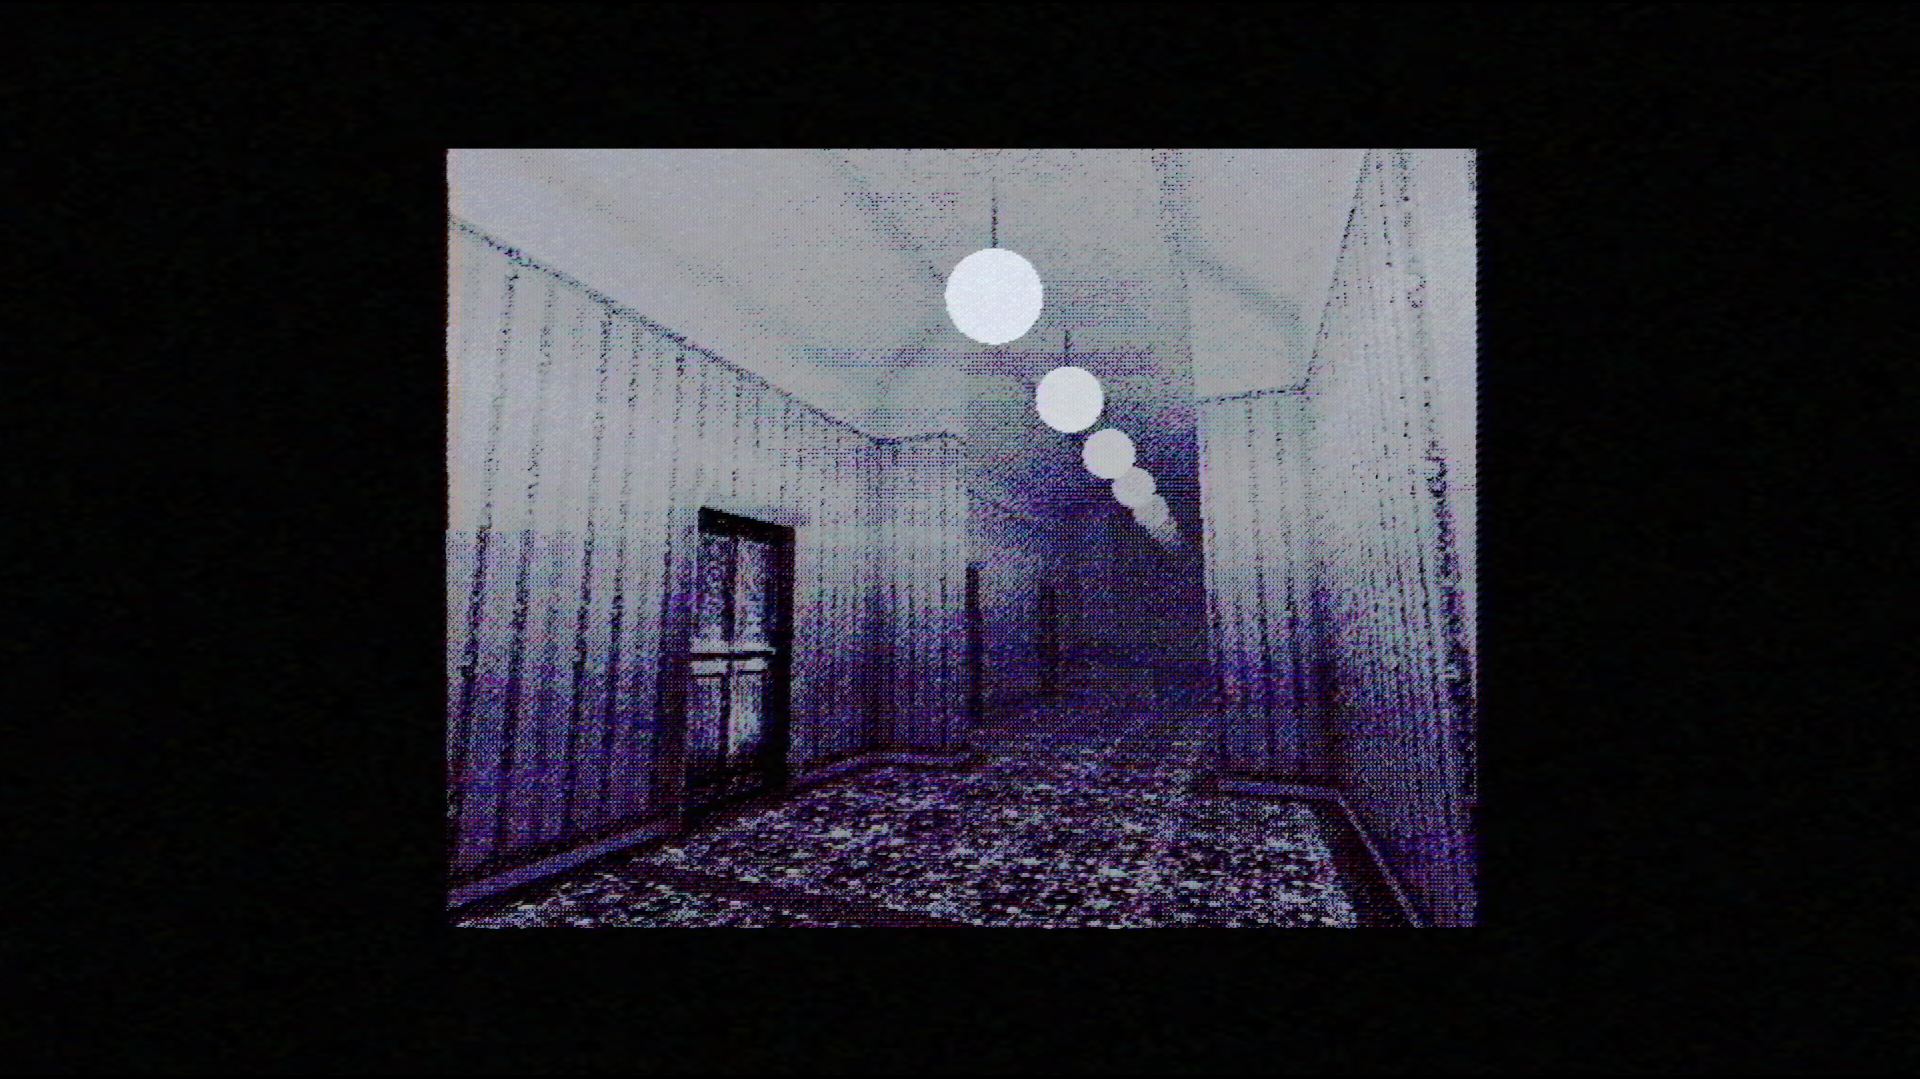 The initial teaser for Reverie showcases haunting hallways